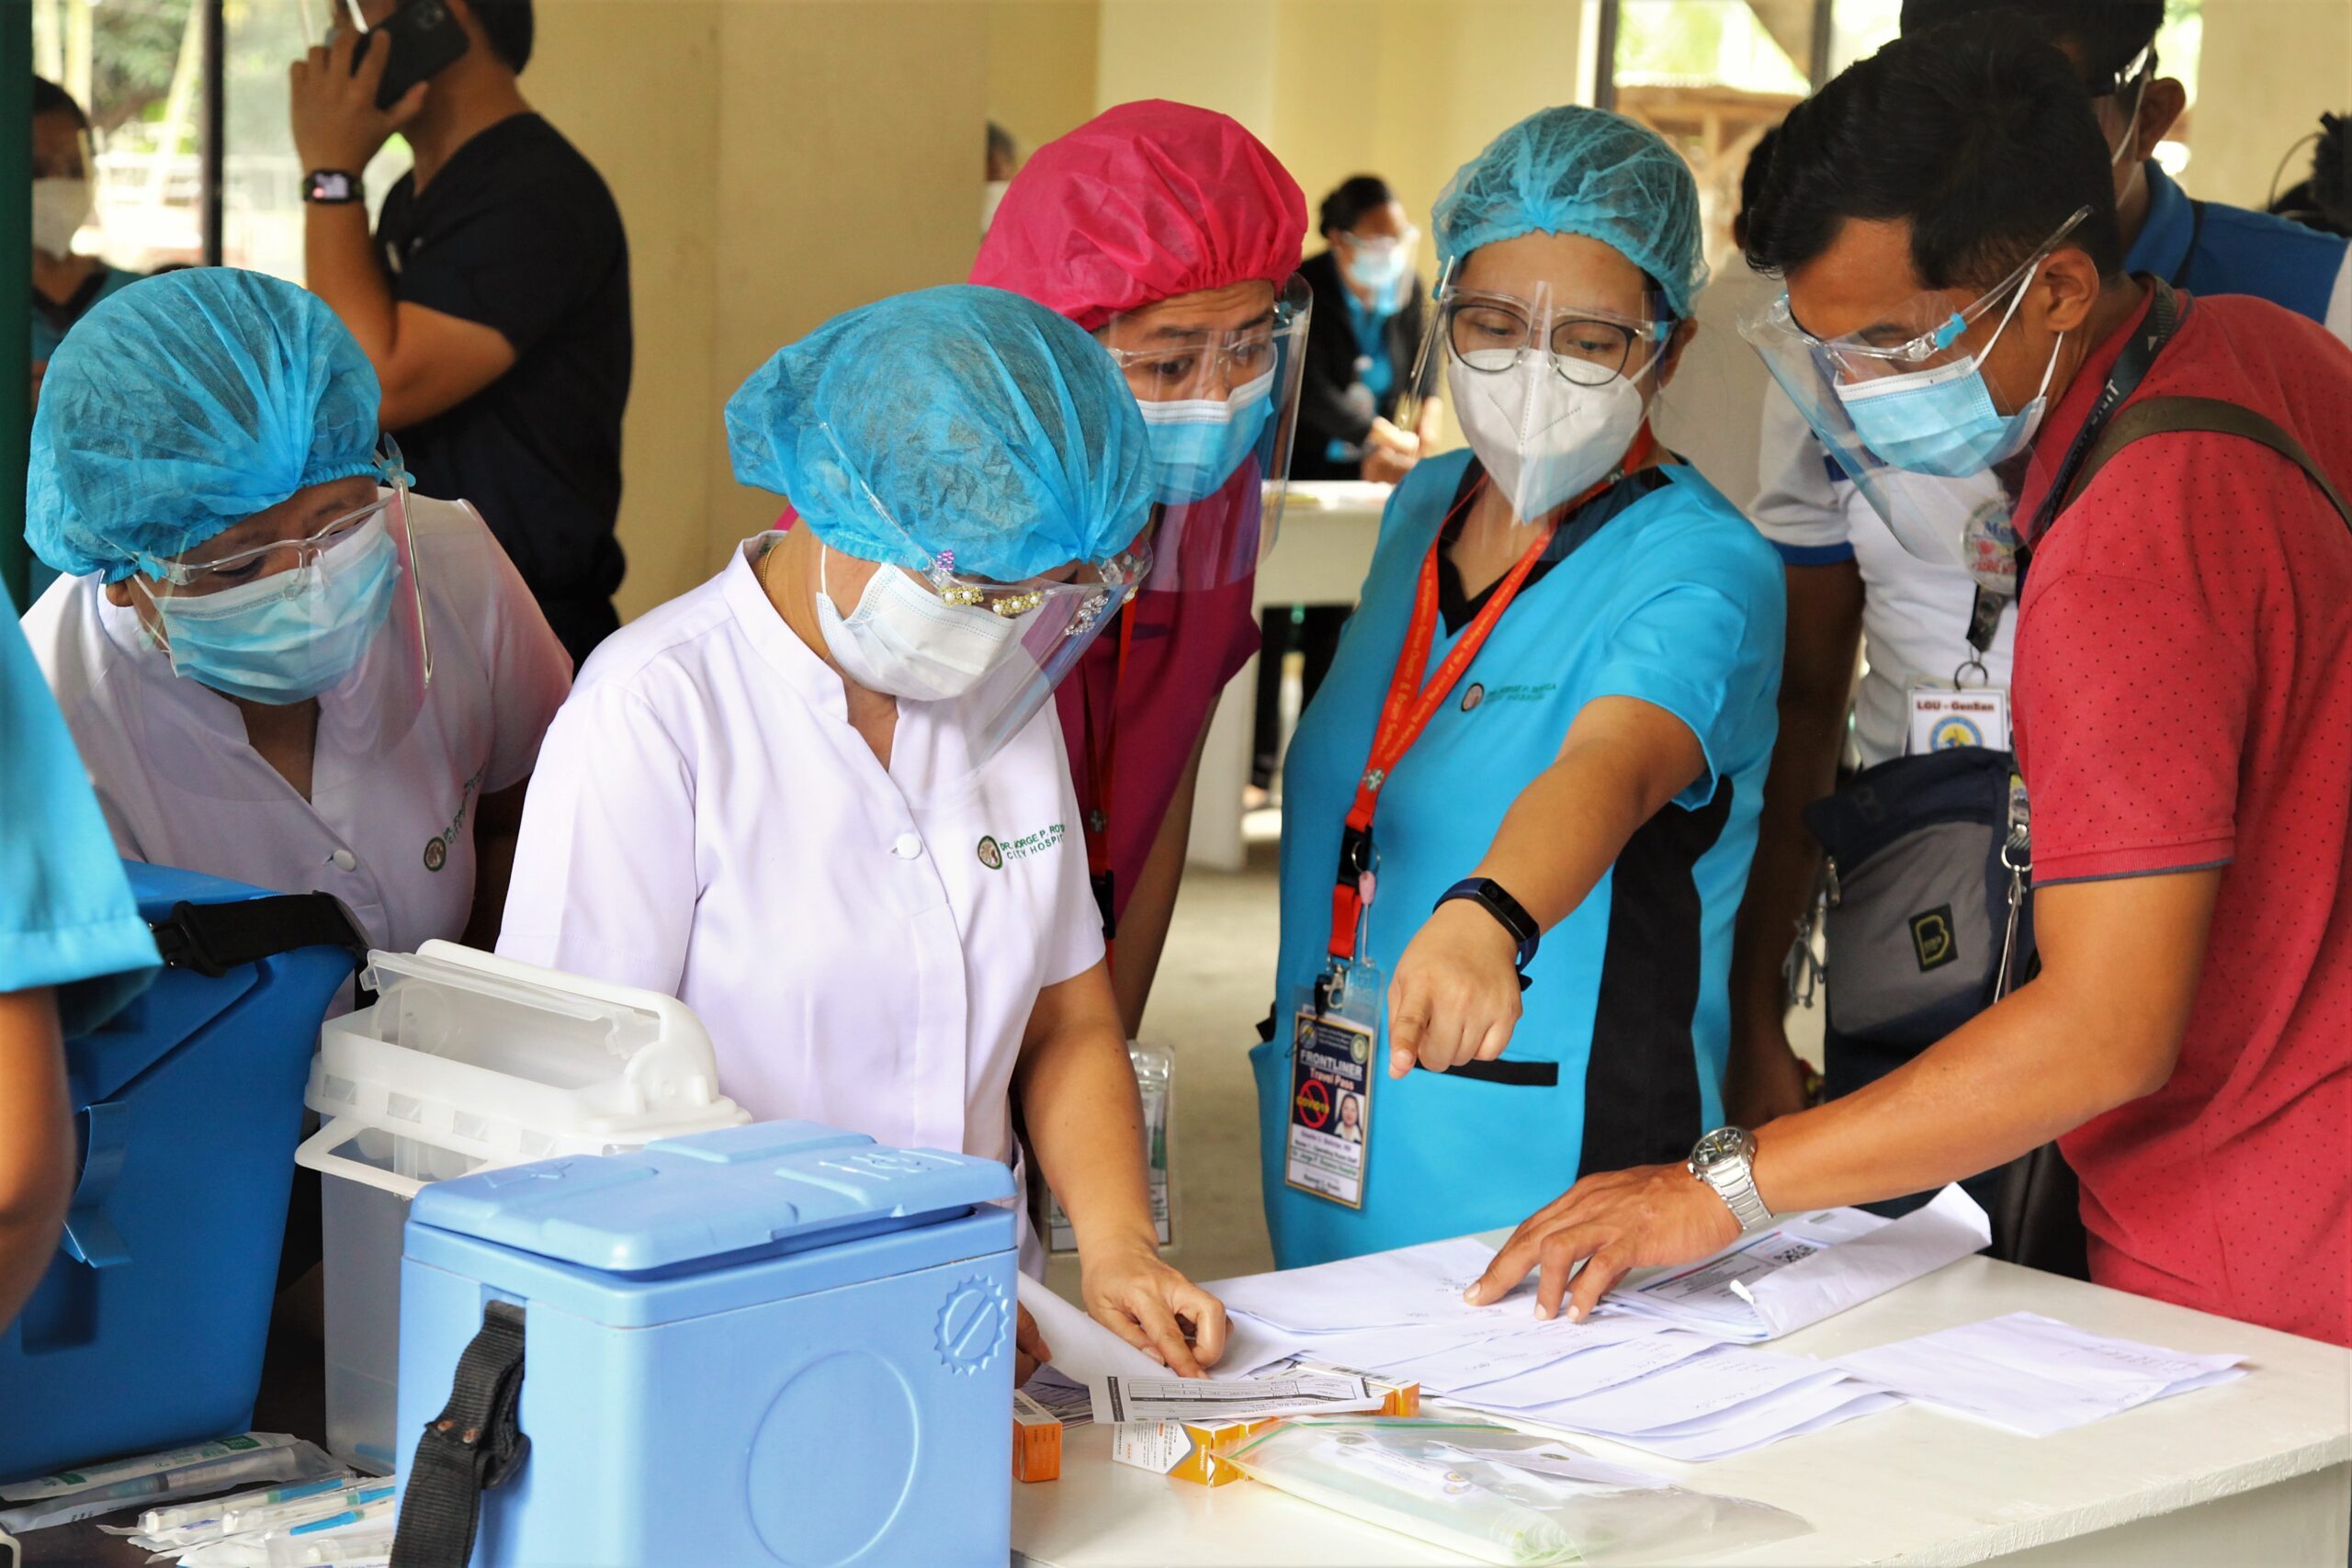 General Santos City sees sudden spike in COVID-19 cases